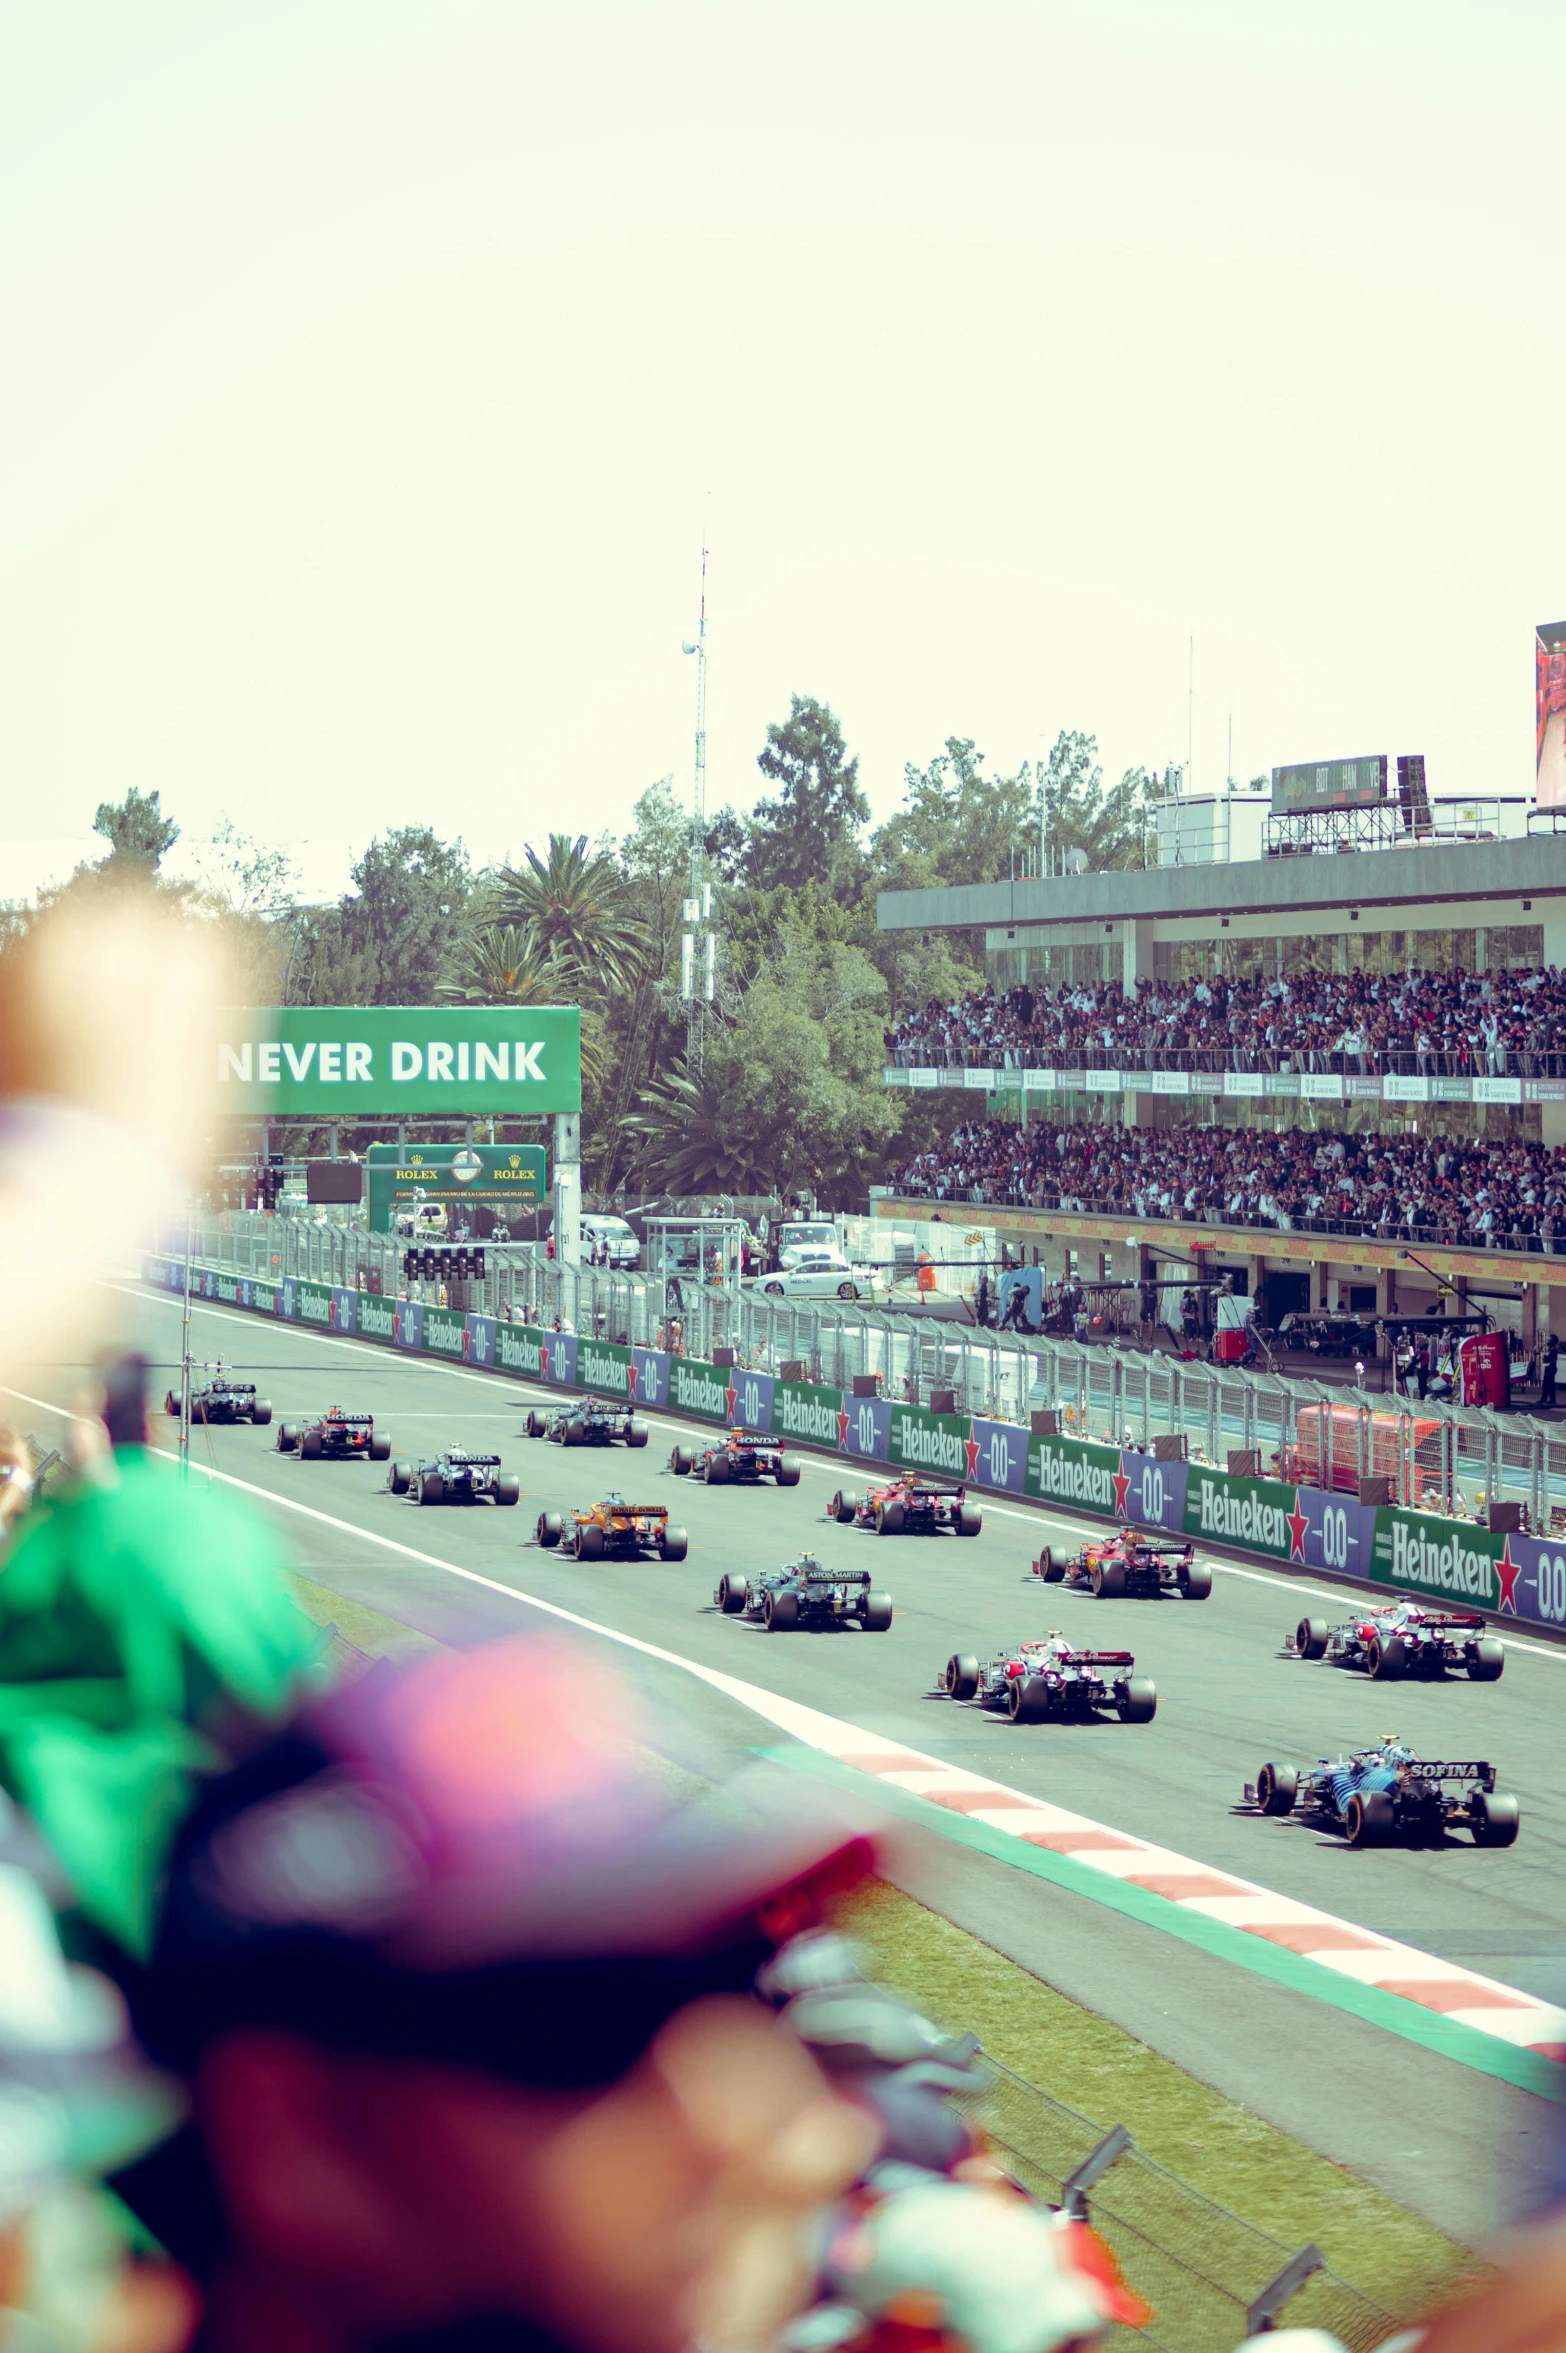 a line of racing cars during a race with the crowd behind